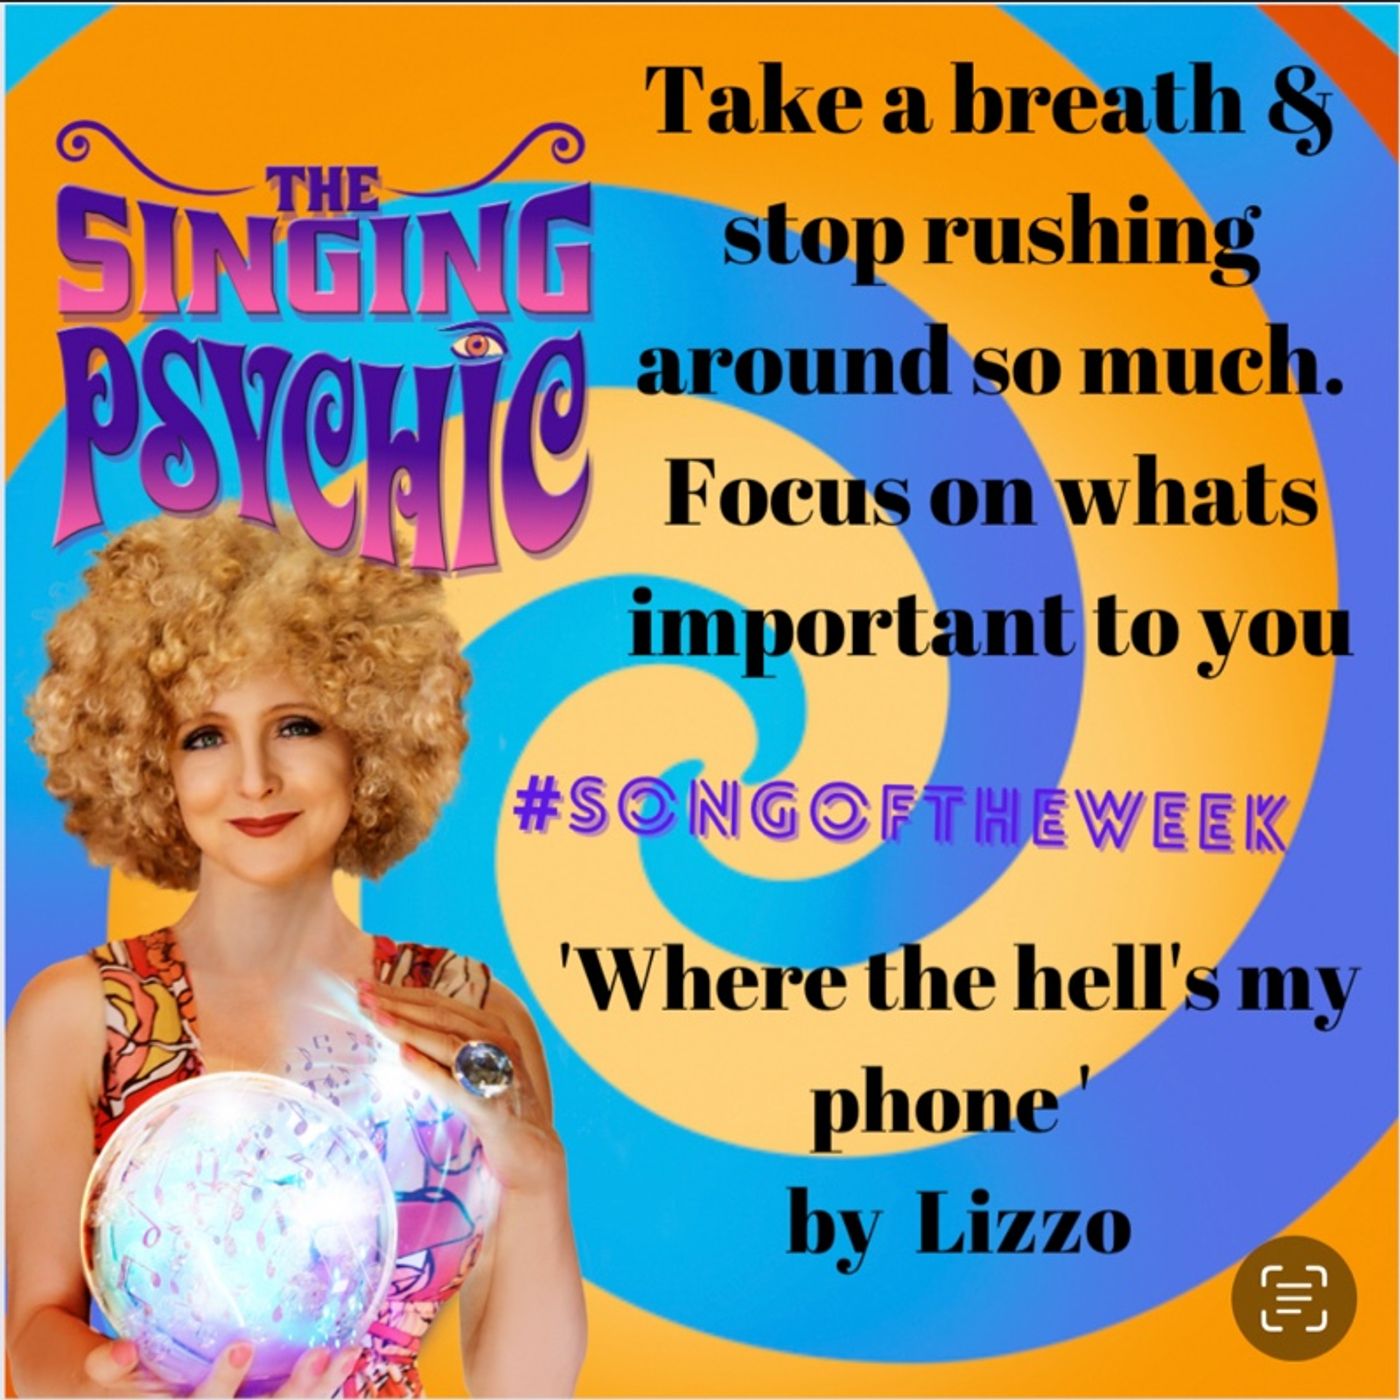 Where the hell’s my phone by Lizzo is Song of the week by The Singing Psychic